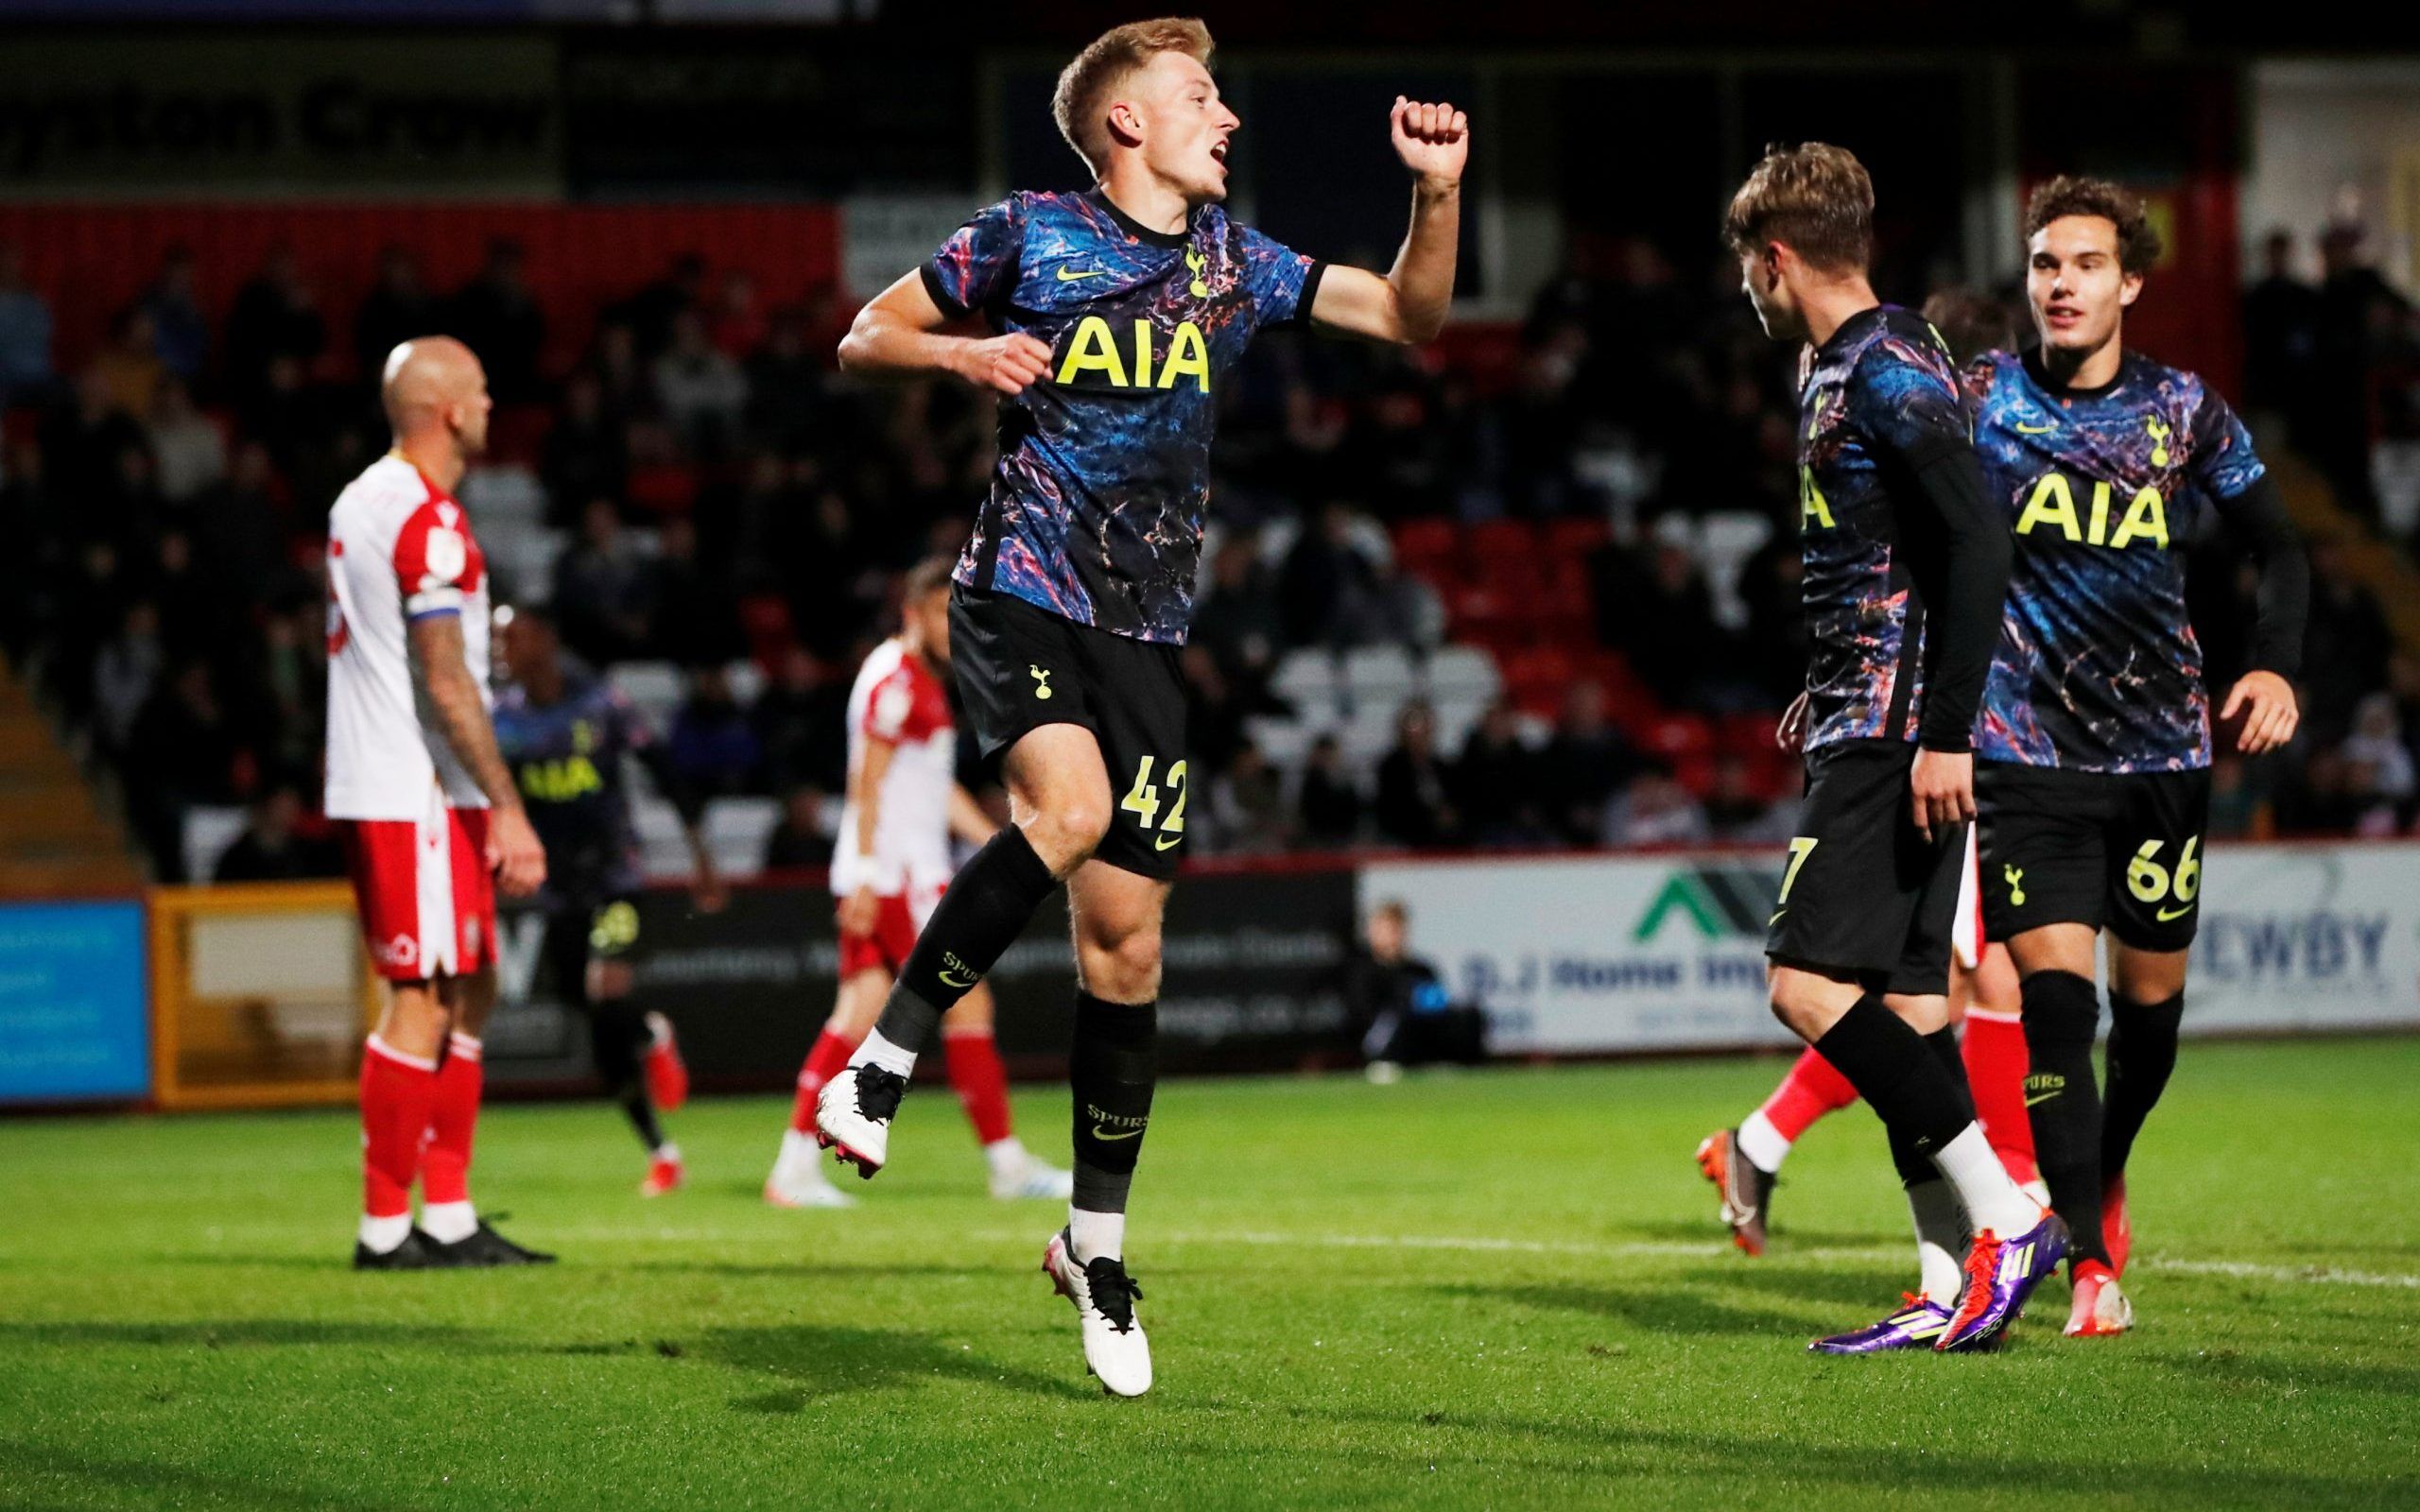 Soccer Football - EFL Trophy - Group Stage - Southern Group H - Stevenage v Tottenham Hotspur U21 - The Lamex Stadium, Stevenage, Britain - August 31, 2021  Tottenham Hotspur's Harvey White celebrates scoring their third goal   Action Images/Paul Childs  EDITORIAL USE ONLY. No use with unauthorized audio, video, data, fixture lists, club/league logos or 